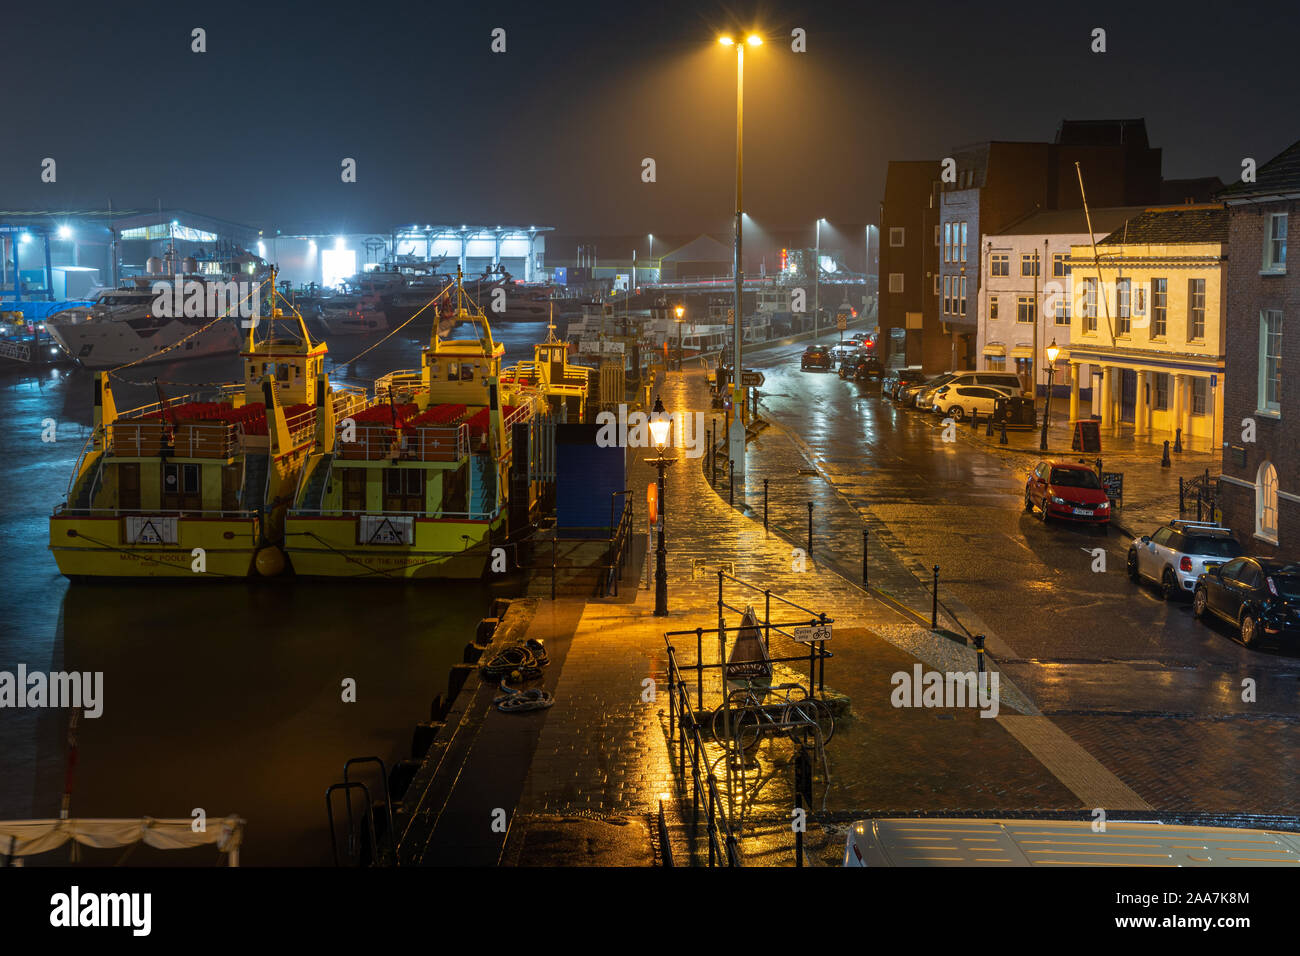 Poole, England, UK - October 3, 2019: Rain falls on the Quay and boats moored in Poole Harbour in Dorset. Stock Photo